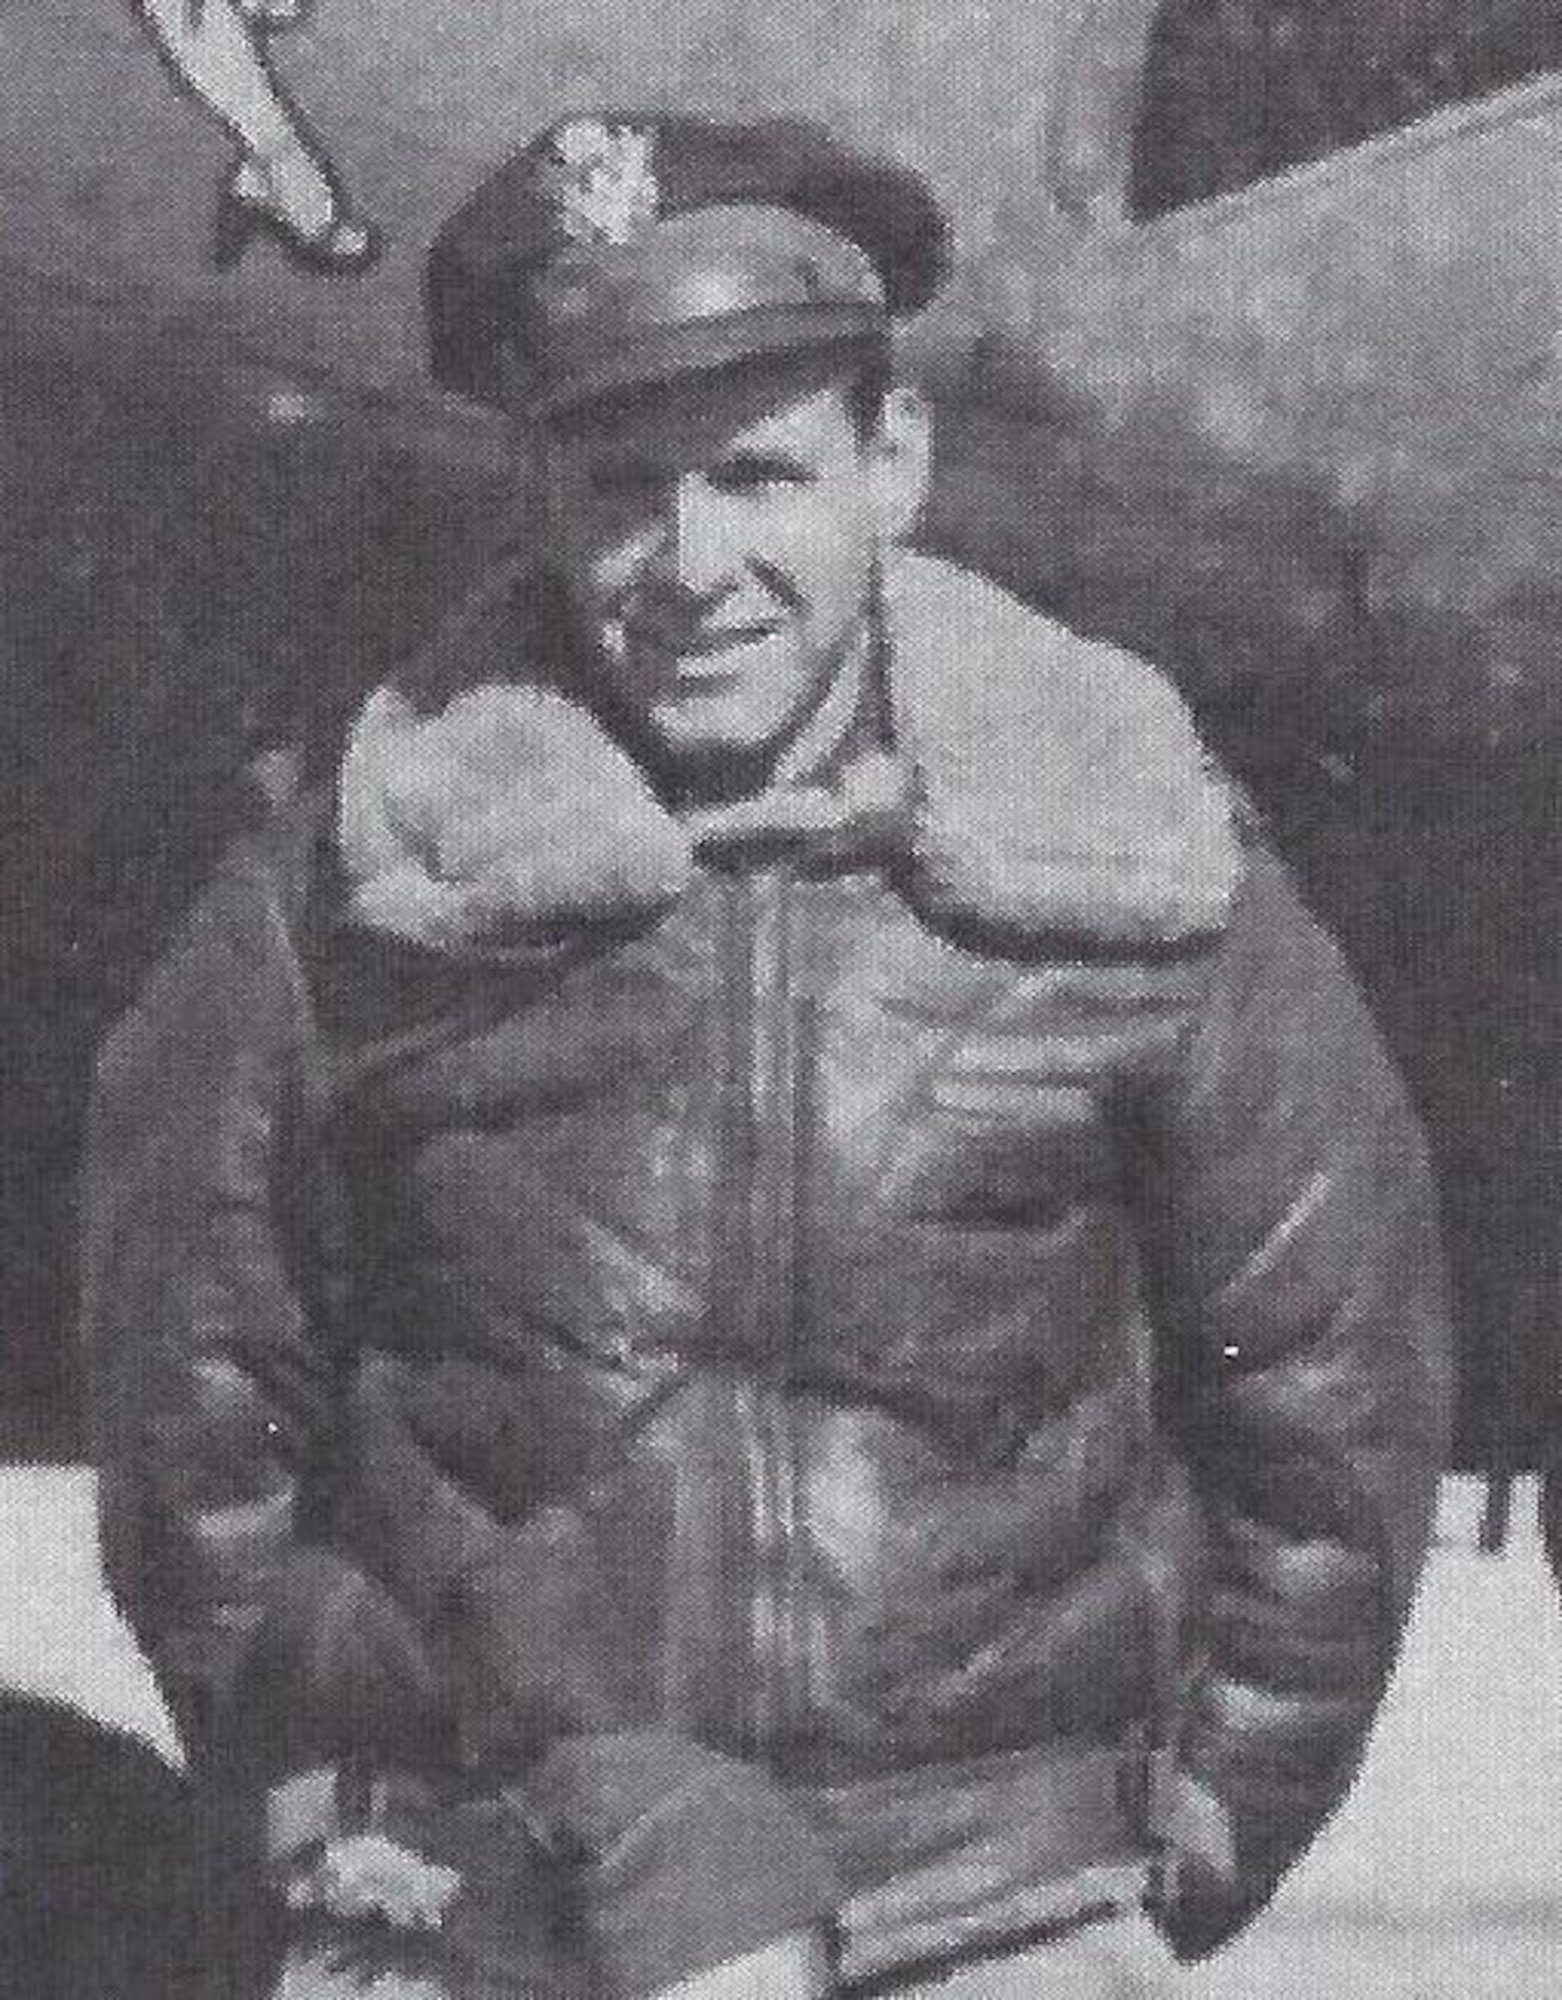 Crawford Elmer Hicks, circa 1944, during his days as a B-17 bomber pilot. (Photo courtesy National Archives)